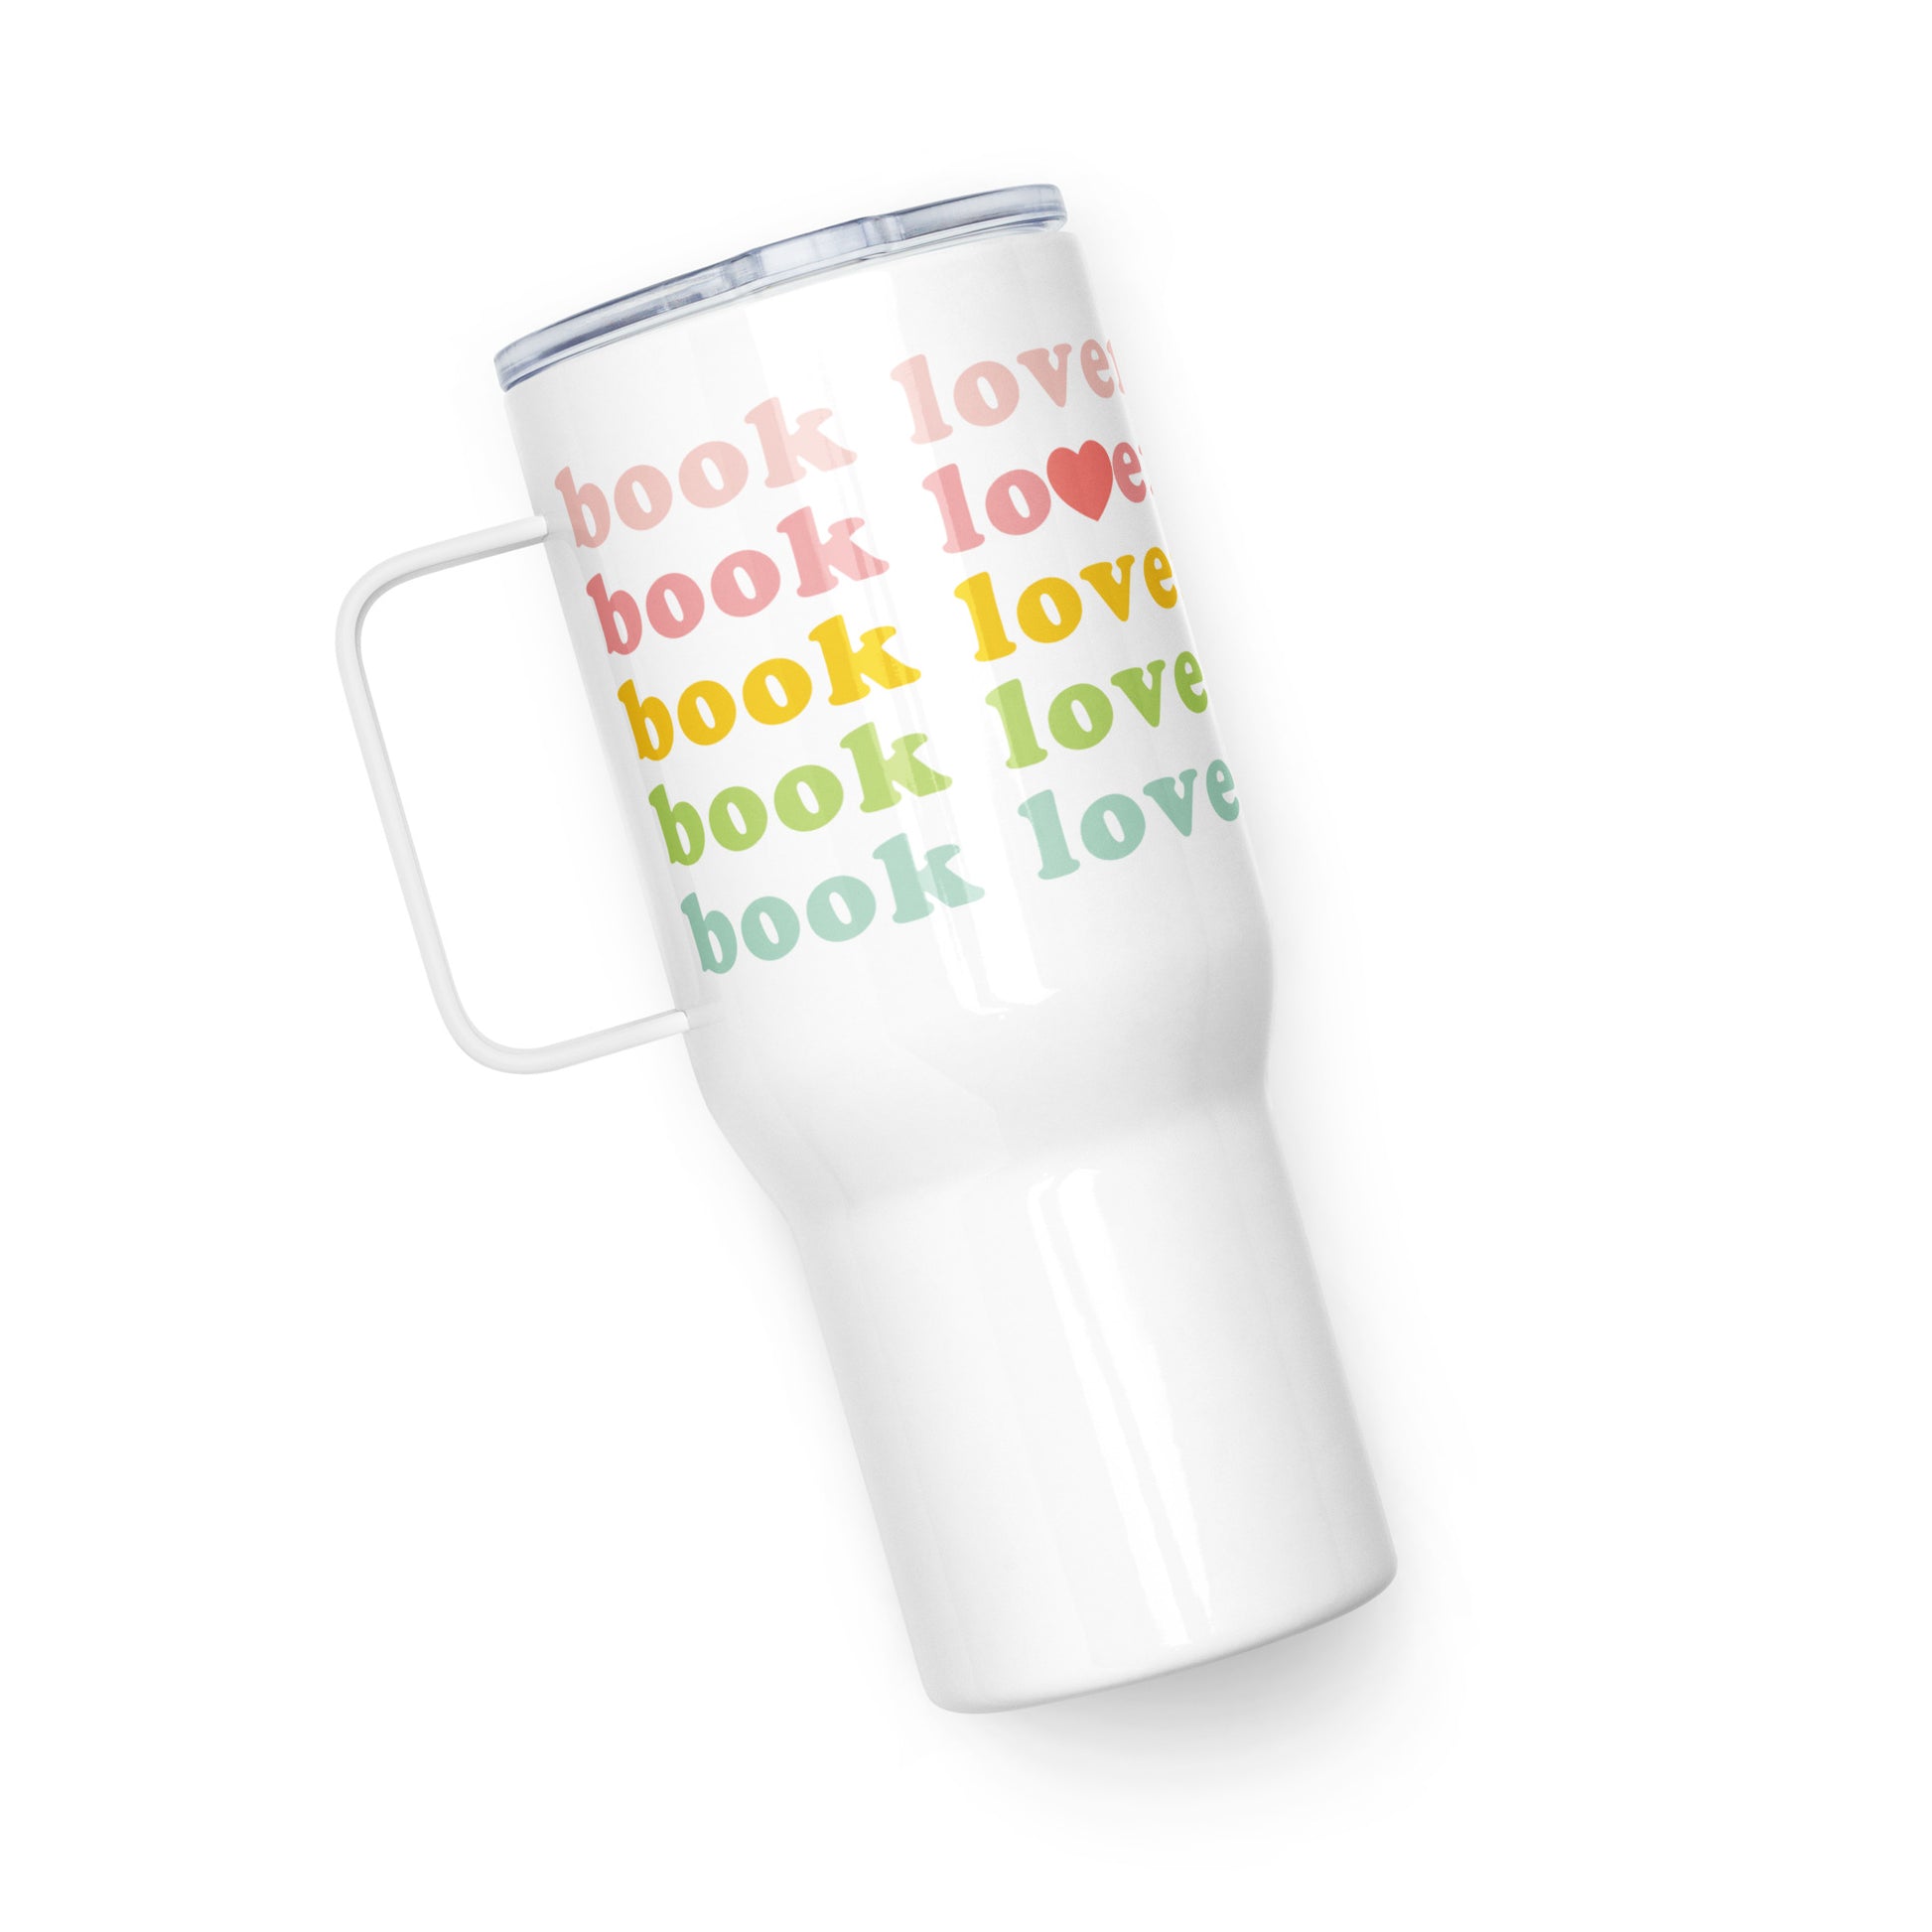 Book Lover Travel Mug with Handle - 25 oz Stainless Steel & BPA-Free Plastic - Spill-Proof Lid - Ideal for Commuting & Adventures